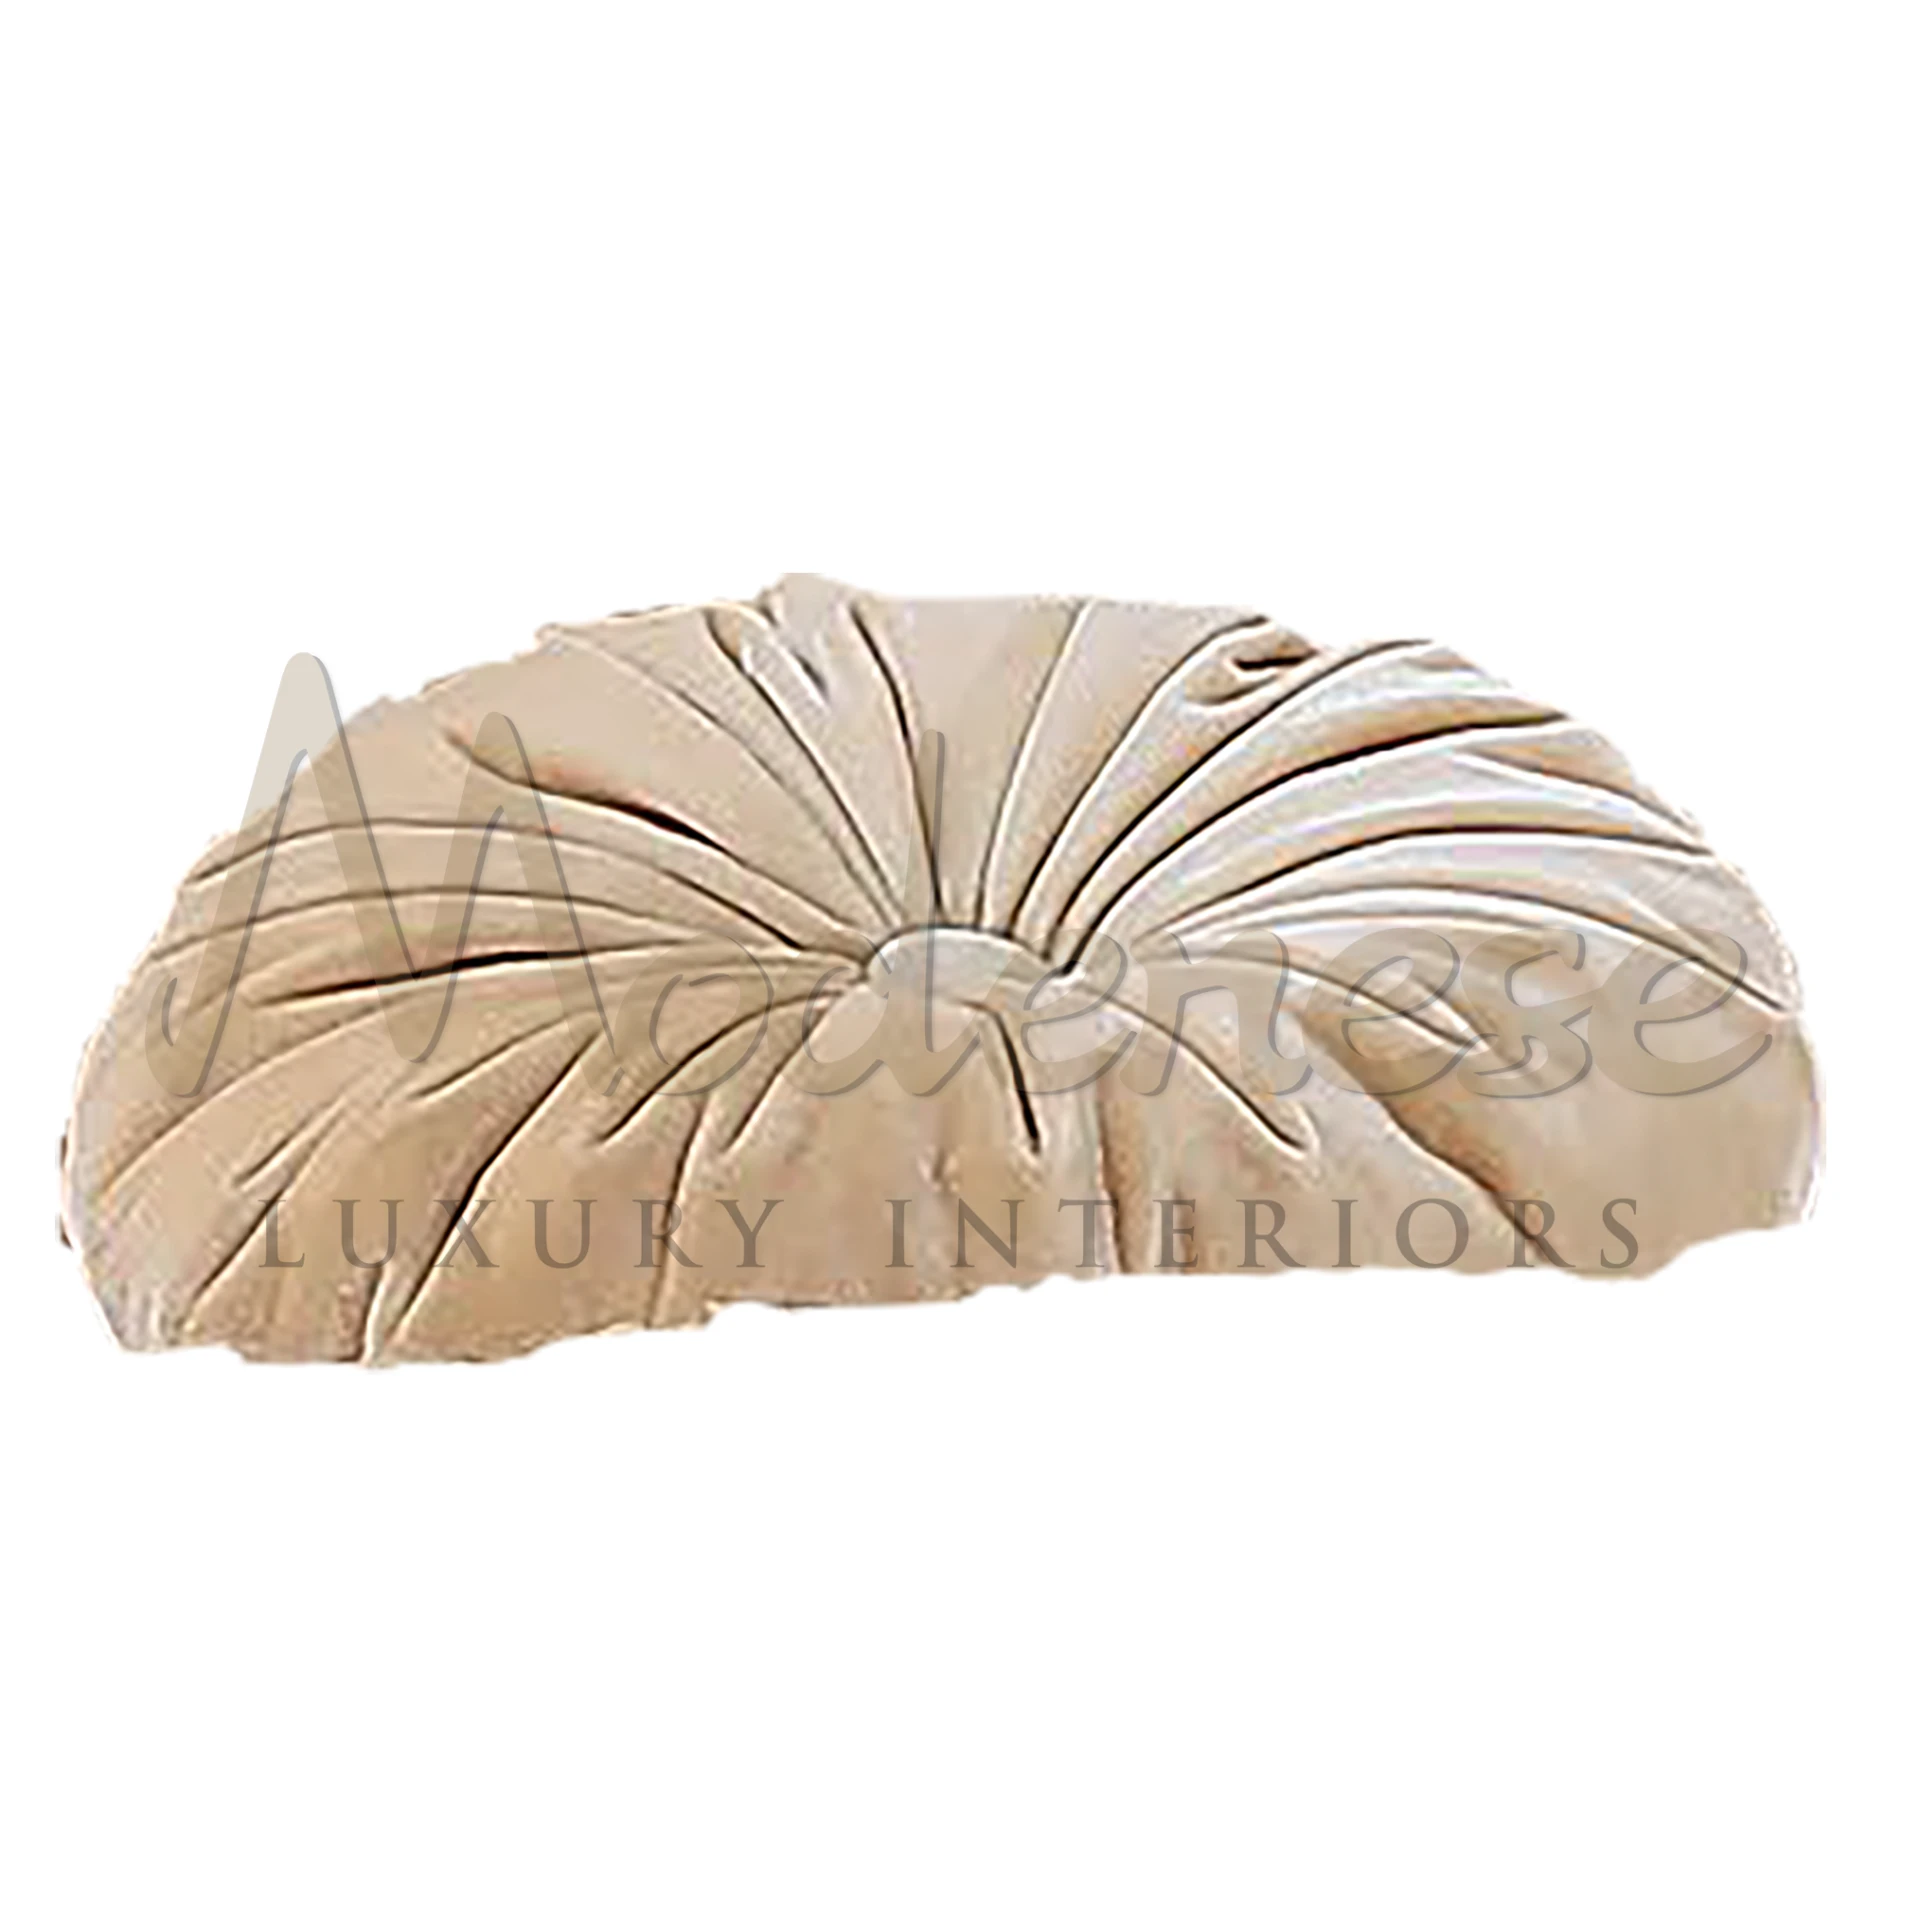 Classical Round Beige Pillow with a classic design, embodying traditional Italian luxury and understated elegance.